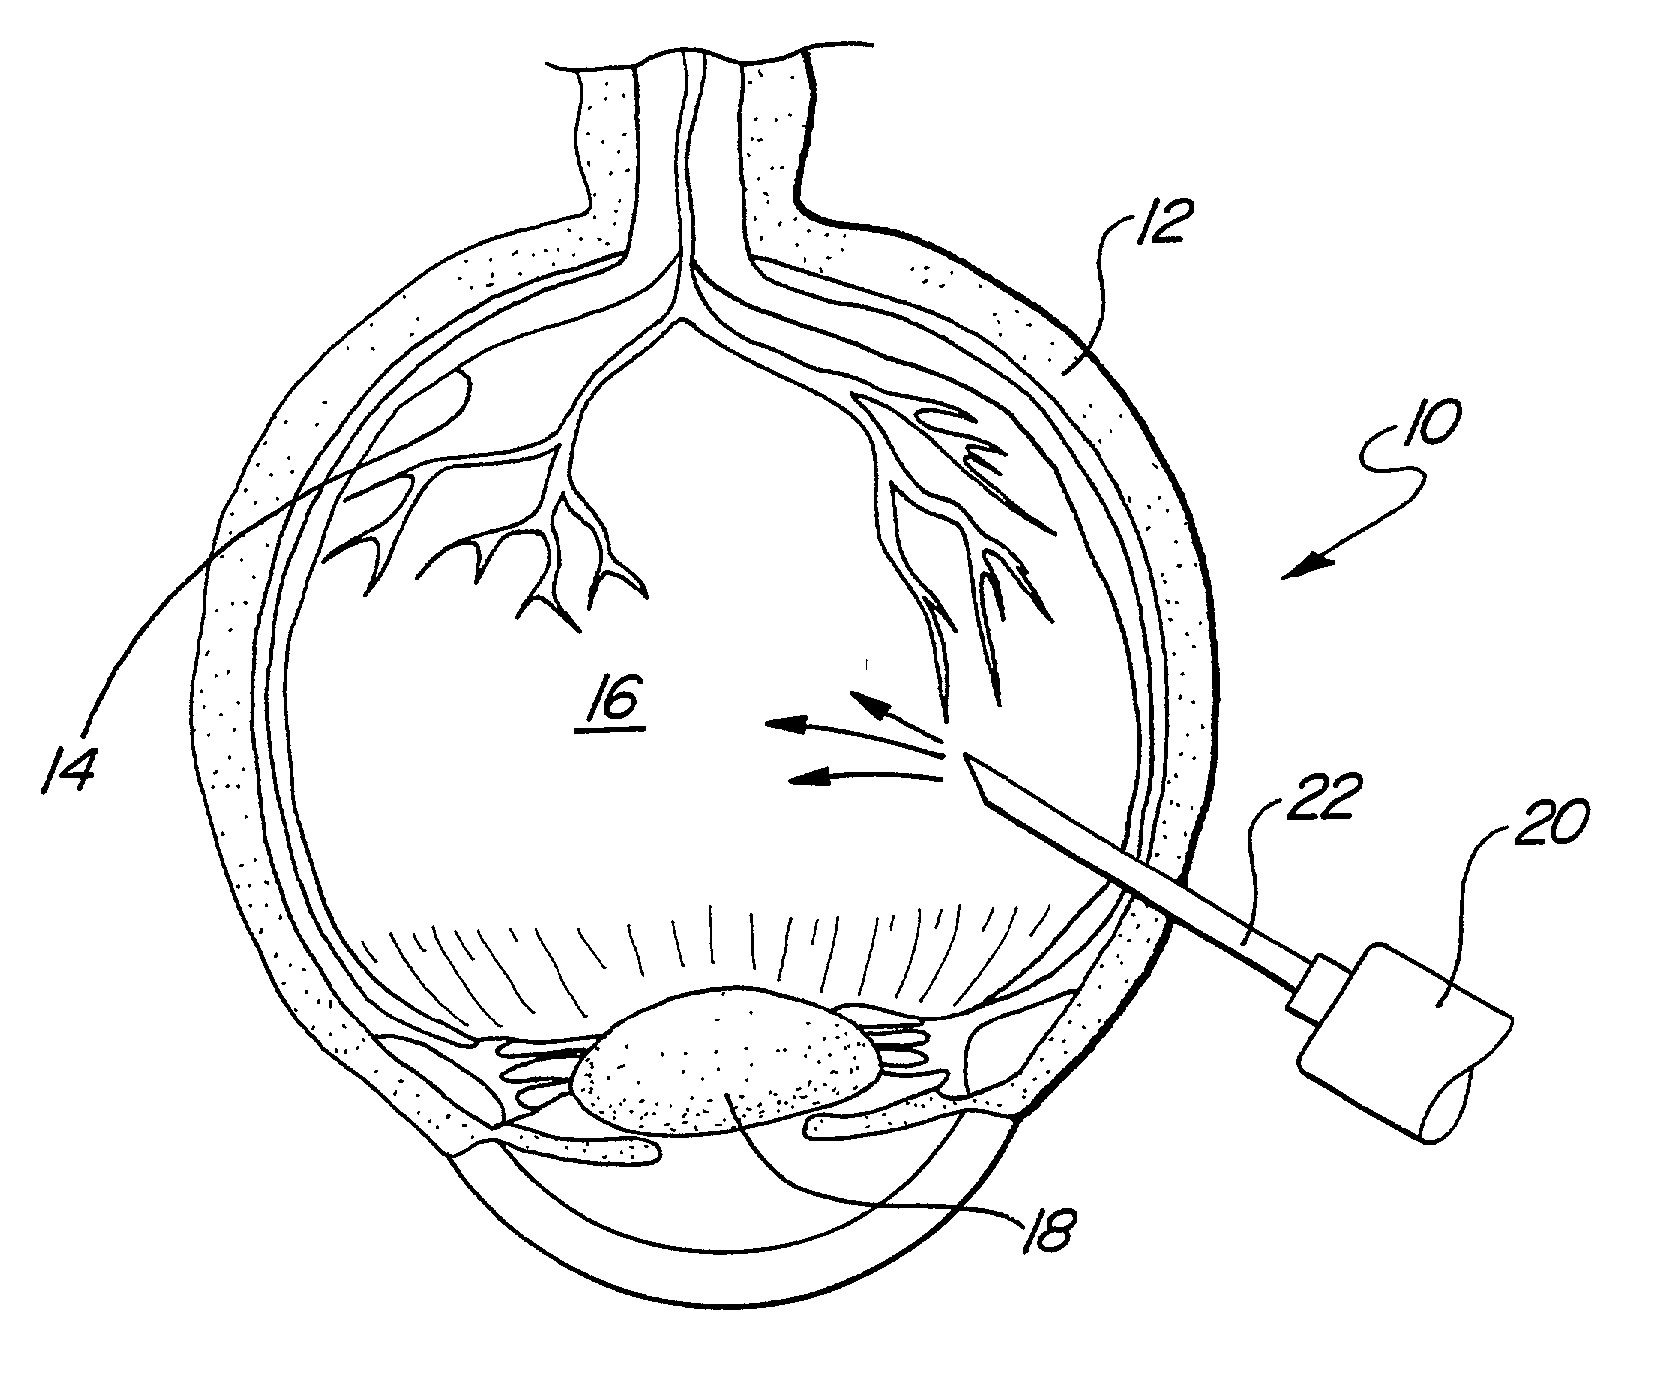 Method for creating a separation of posterior cortical vitreous from the retina of the eye